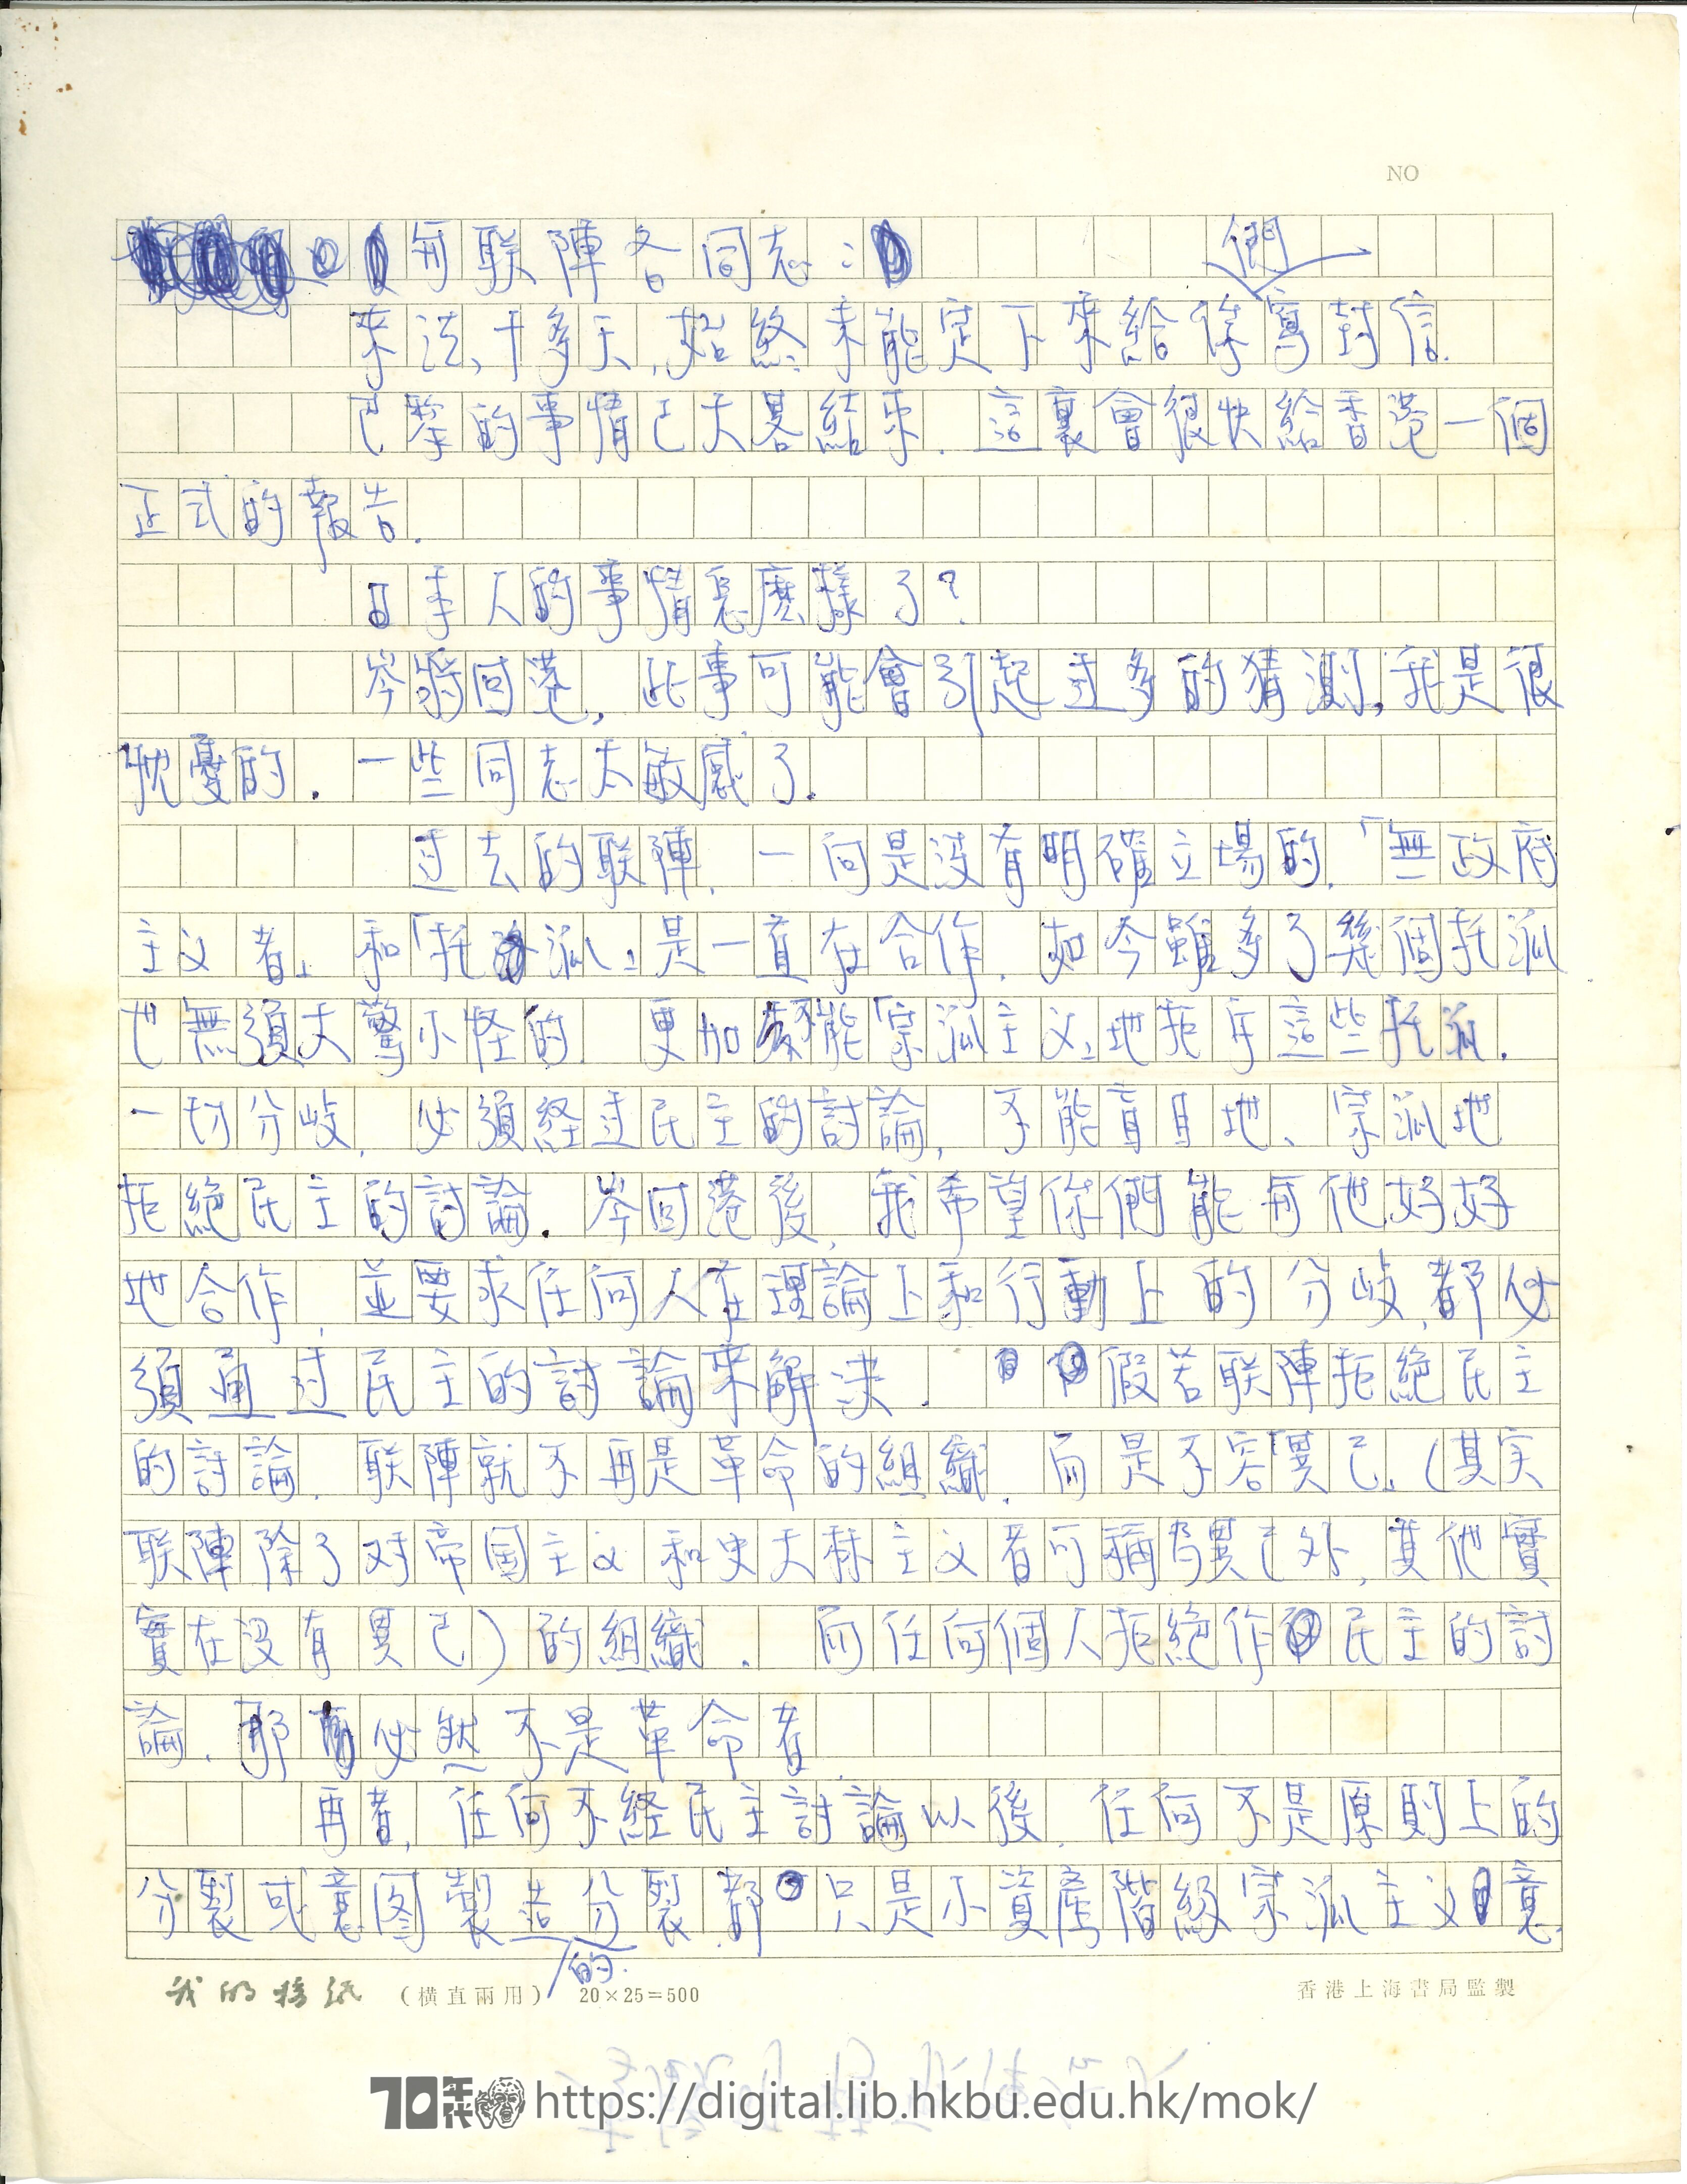   Letter from Lee Wai-ming to Members of United Front 李懷明 